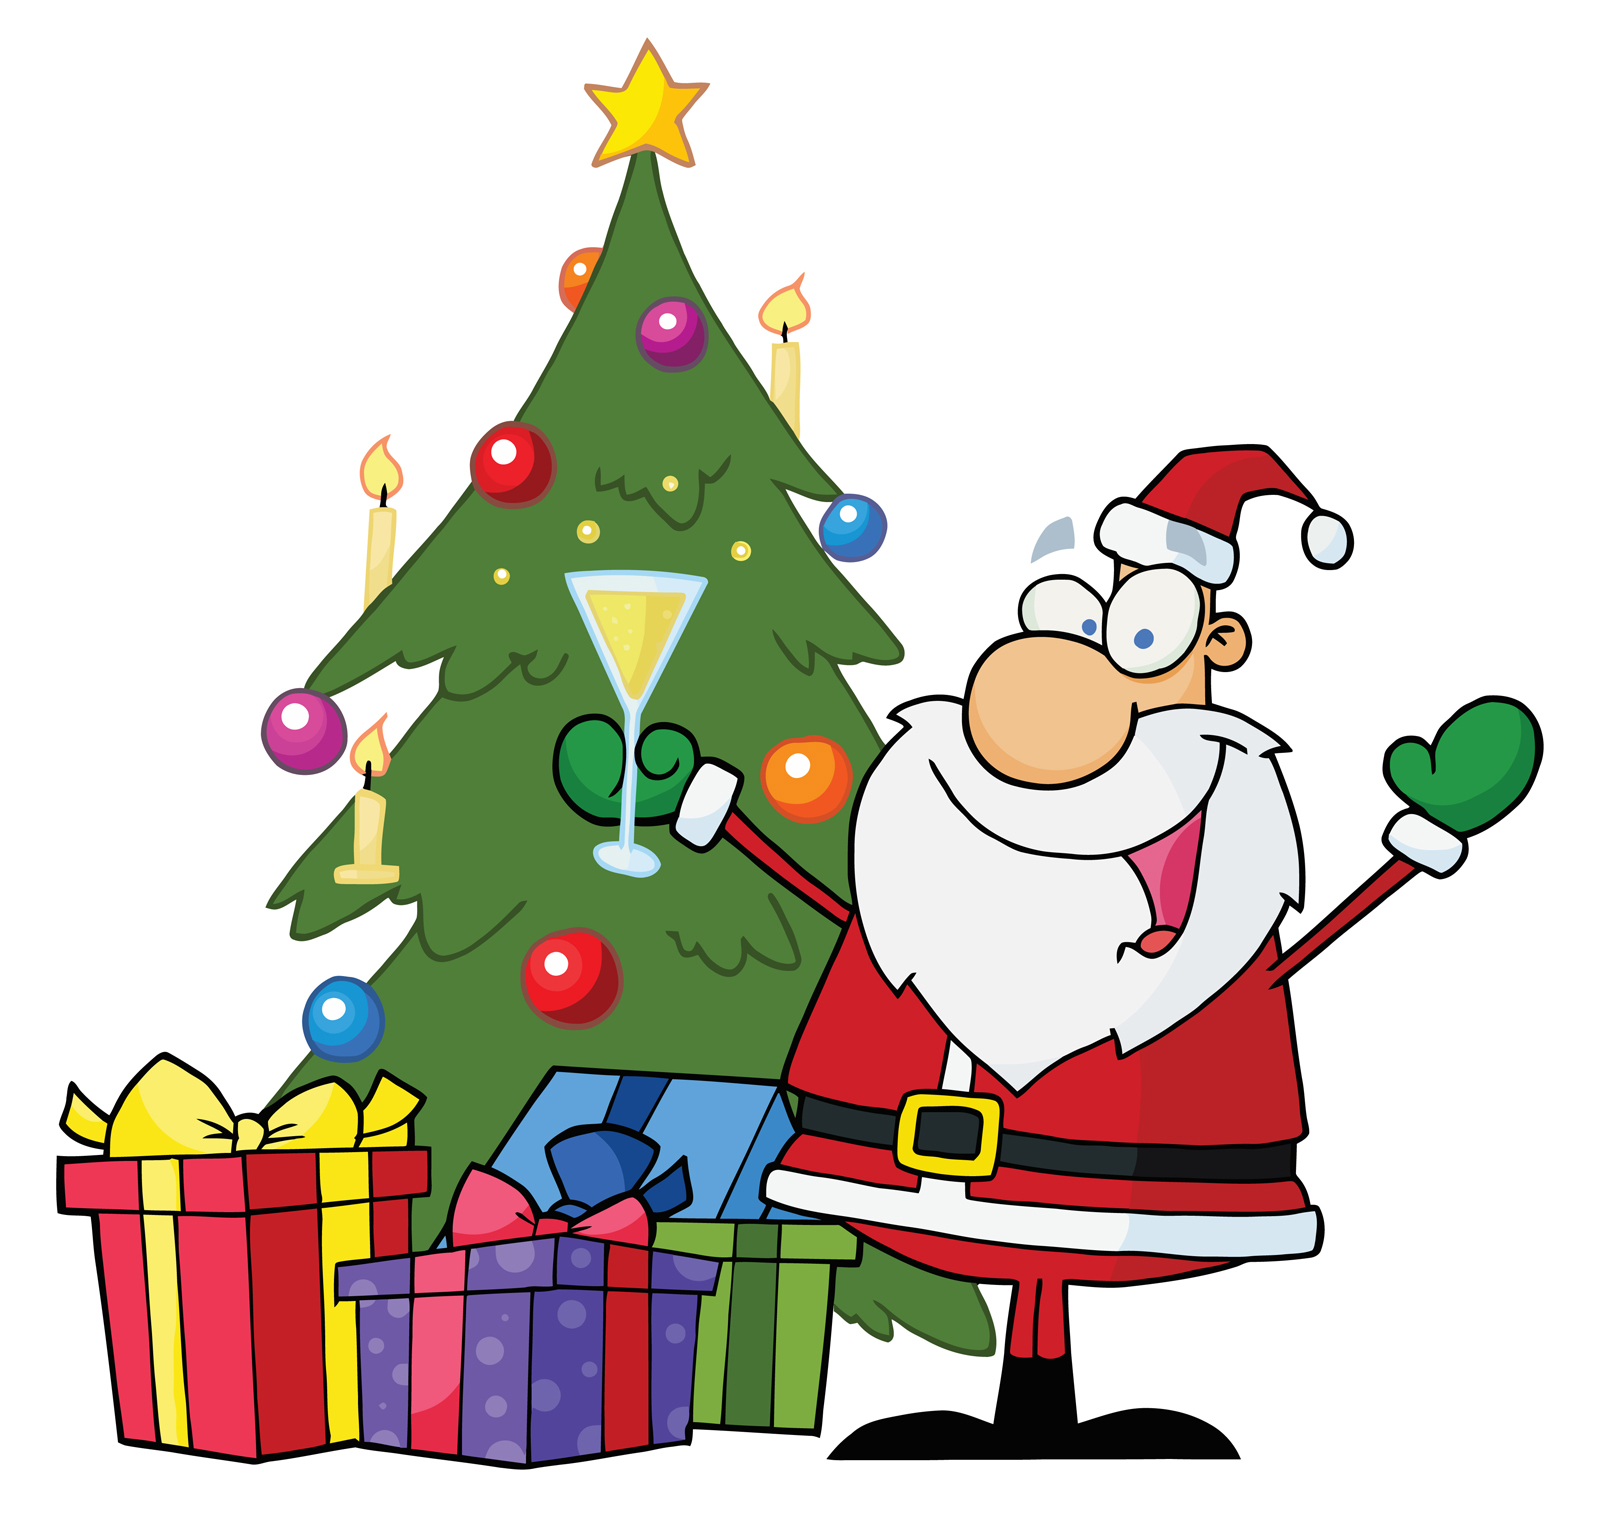 Xmas Stuff For > Christmas Tree With Presents And Santa Clip Art